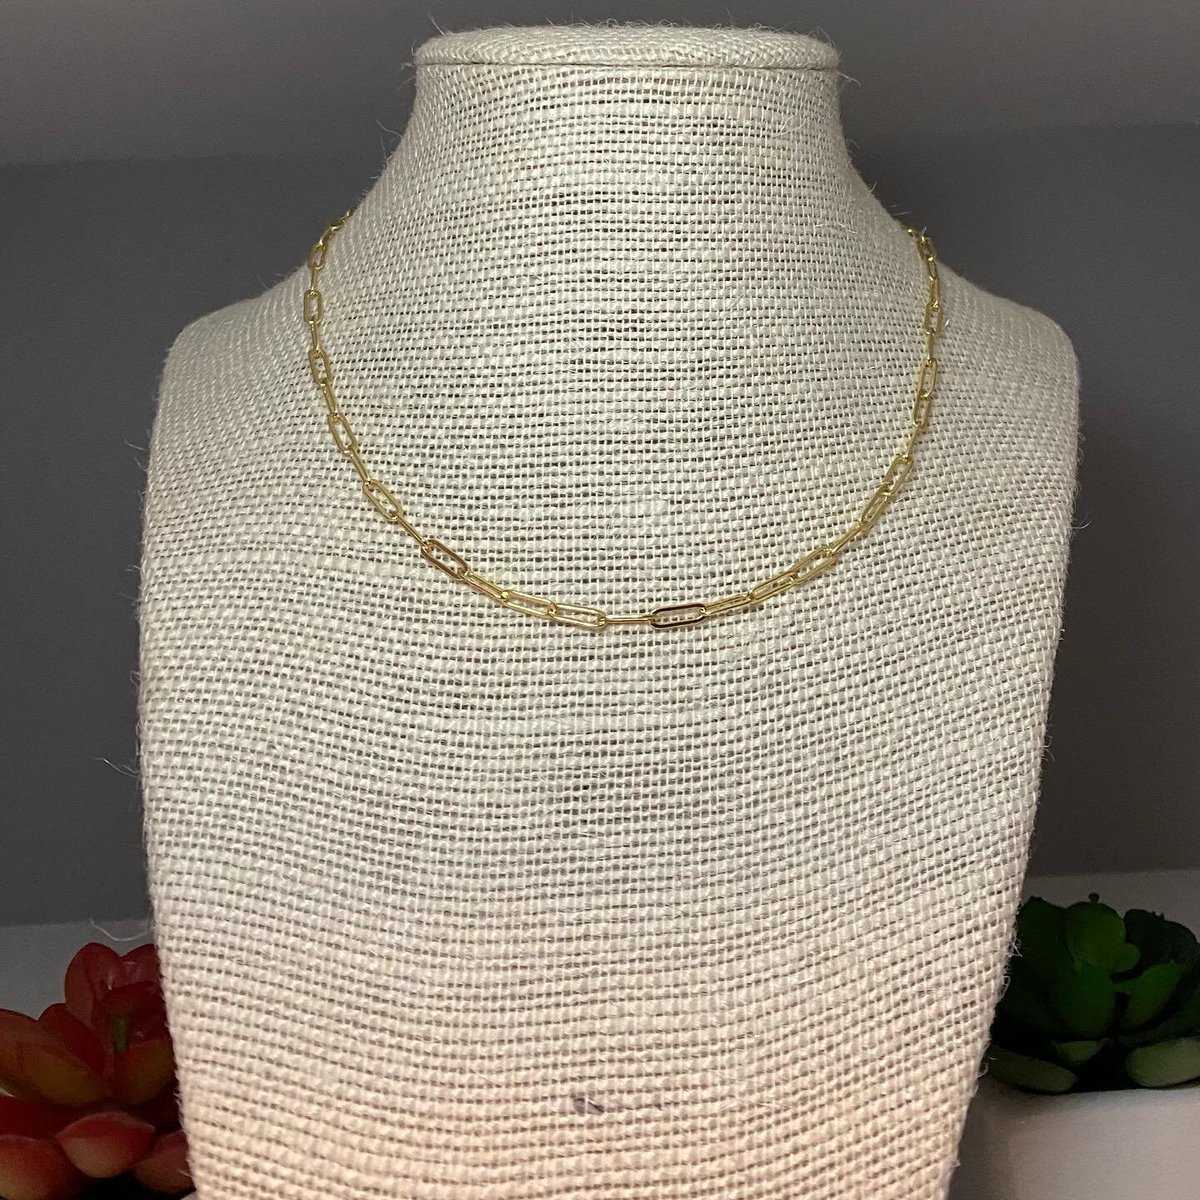 Excited to share the latest addition to my #etsy shop: 24k Gold Filled Paper Clip Chain Necklace etsy.me/3MKlcbV #gold #unisexadults #lobsterclaw #24kgold #24kgoldfilled #paperclipchain #paperclipnecklace #24kgoldnecklace #daintyjewelry #love2jewelry